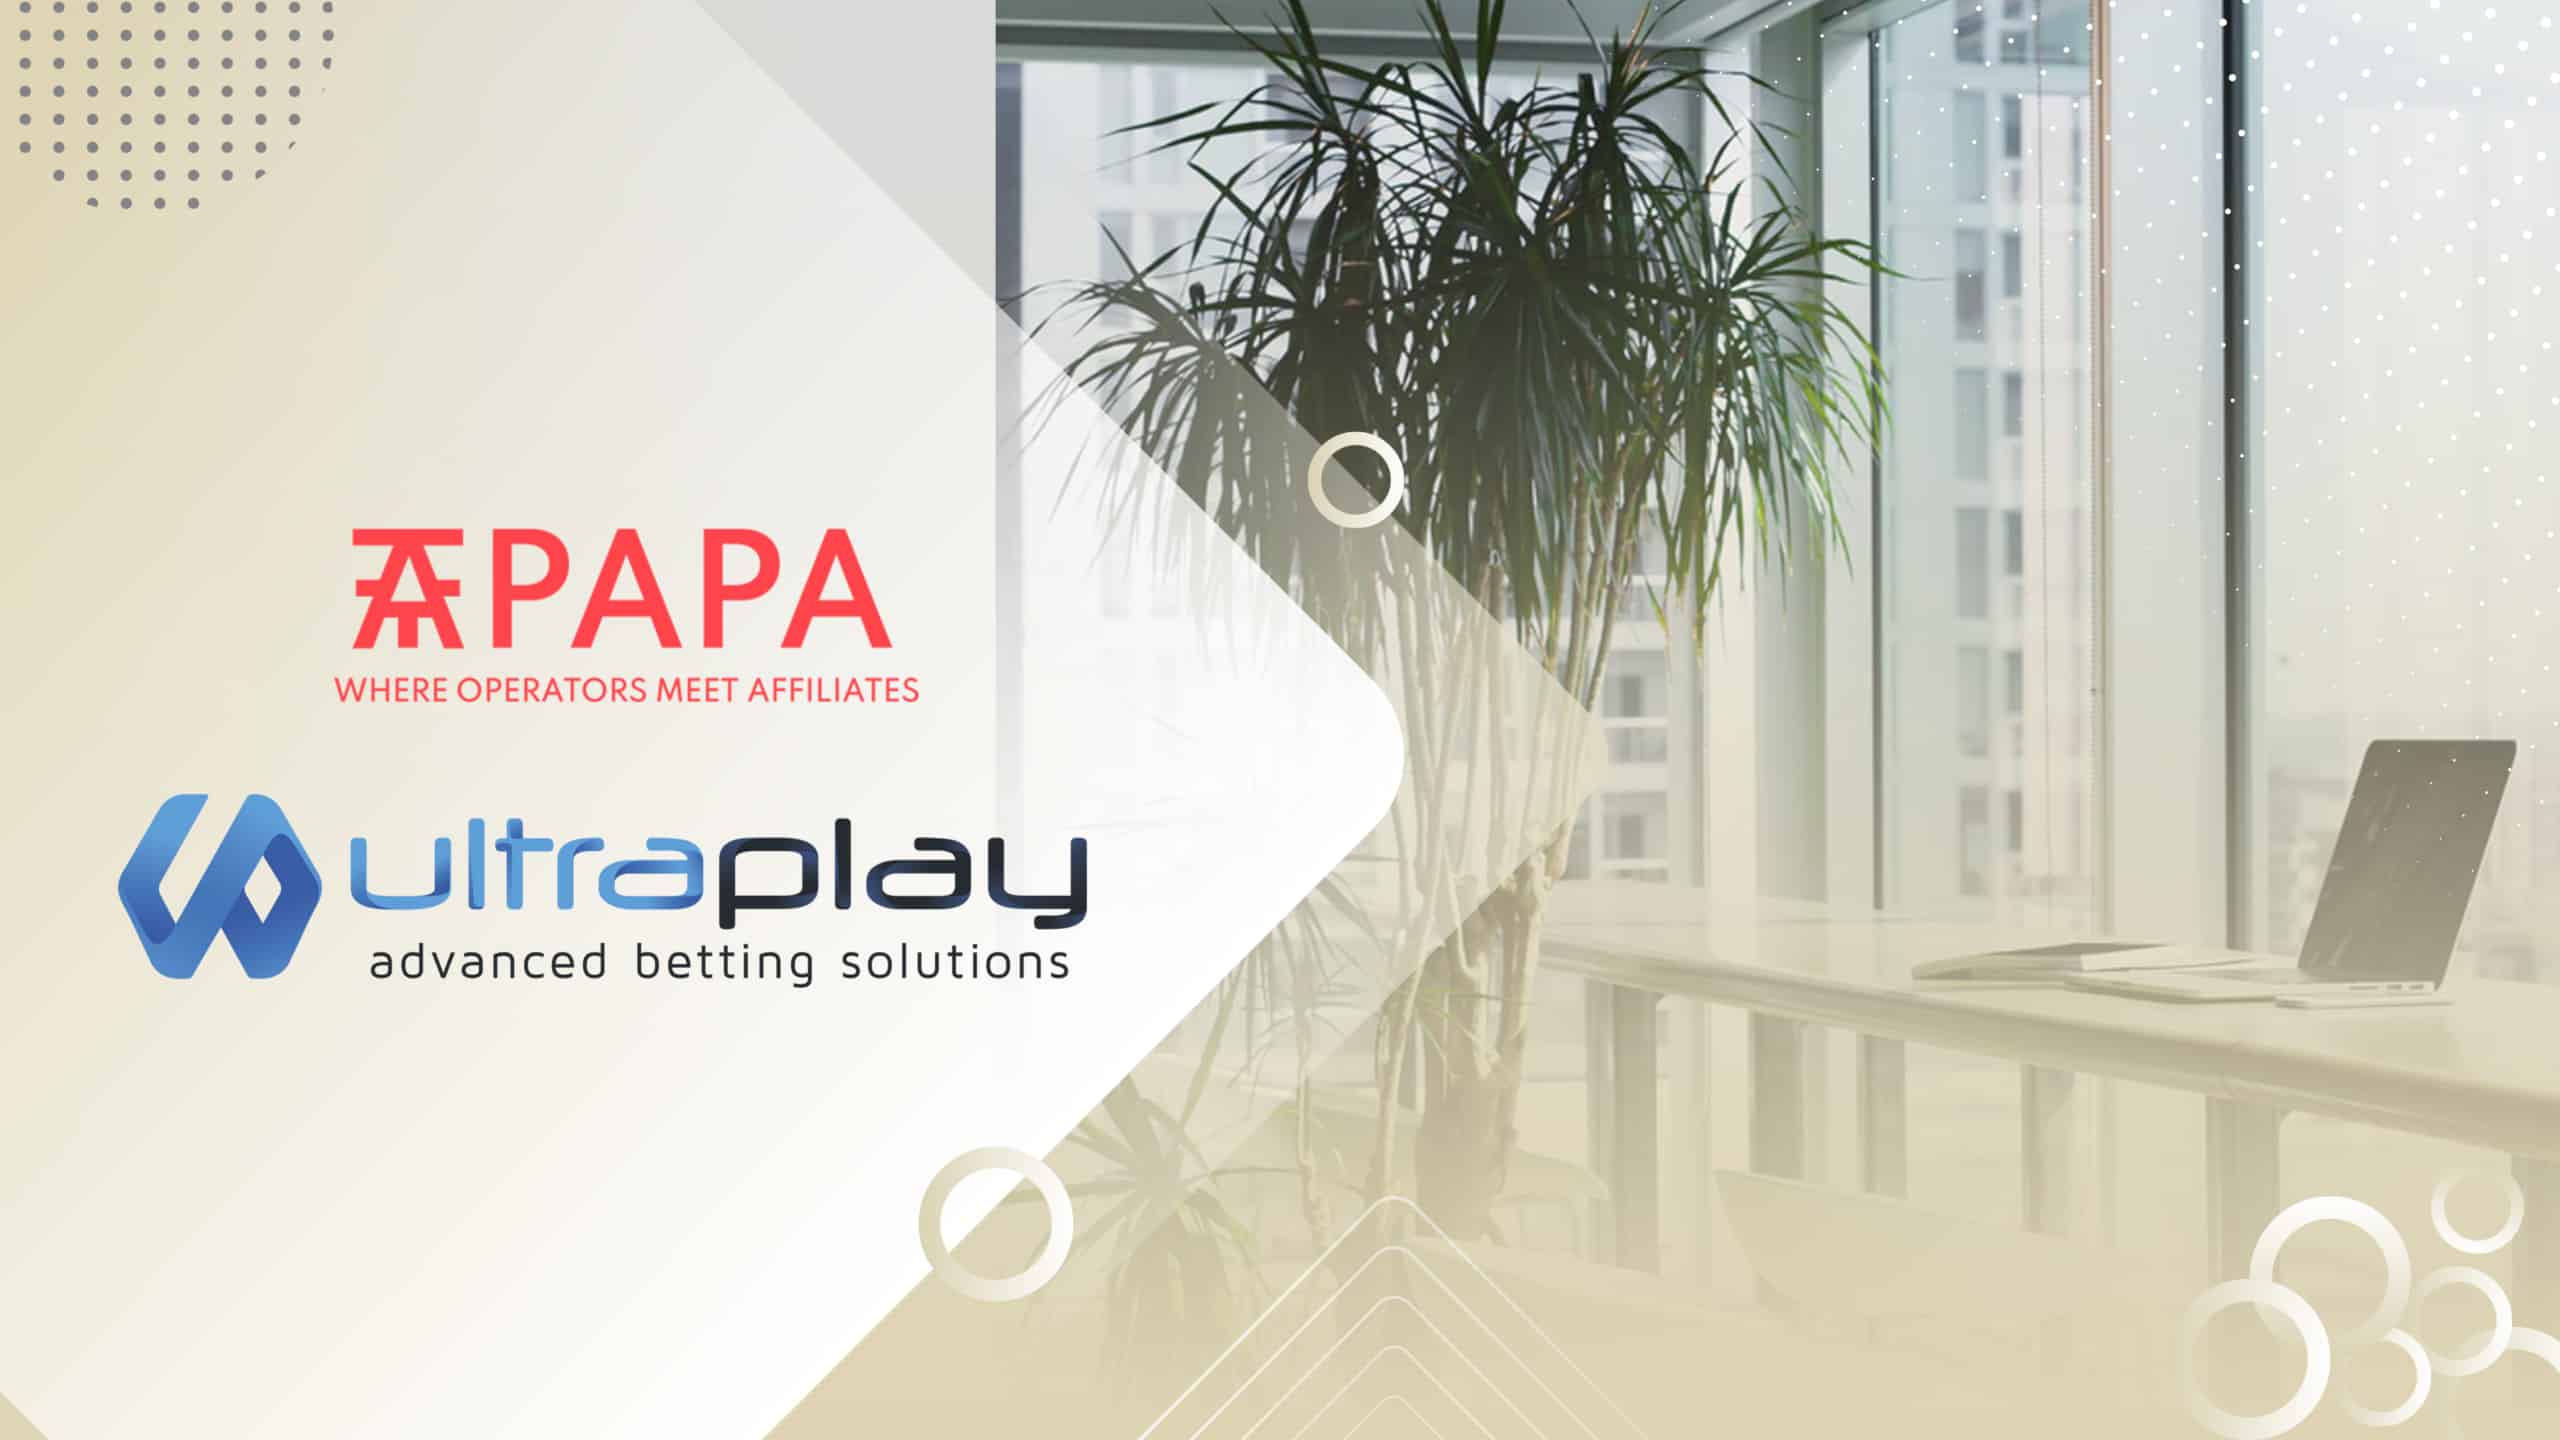 AffPapa announces new partnership with UltraPlay